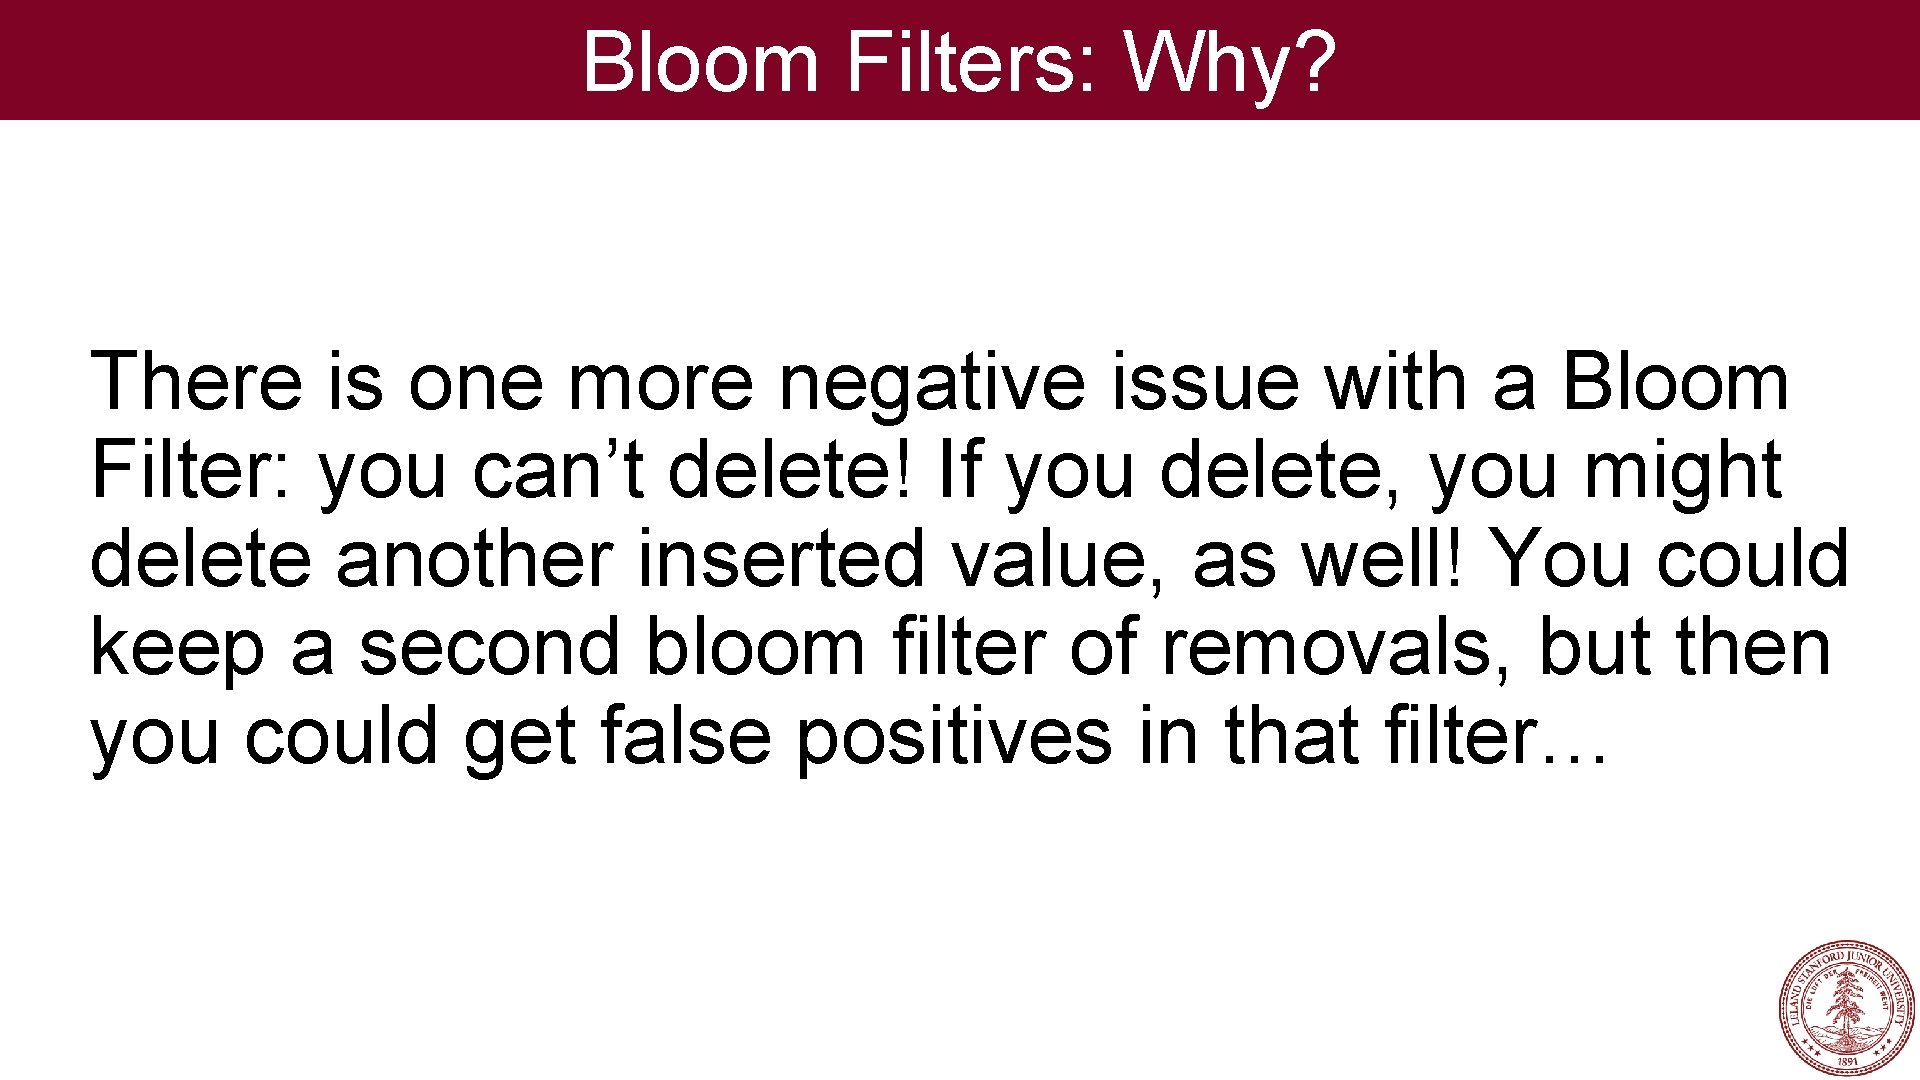 Bloom Filters: Why? There is one more negative issue with a Bloom Filter: you